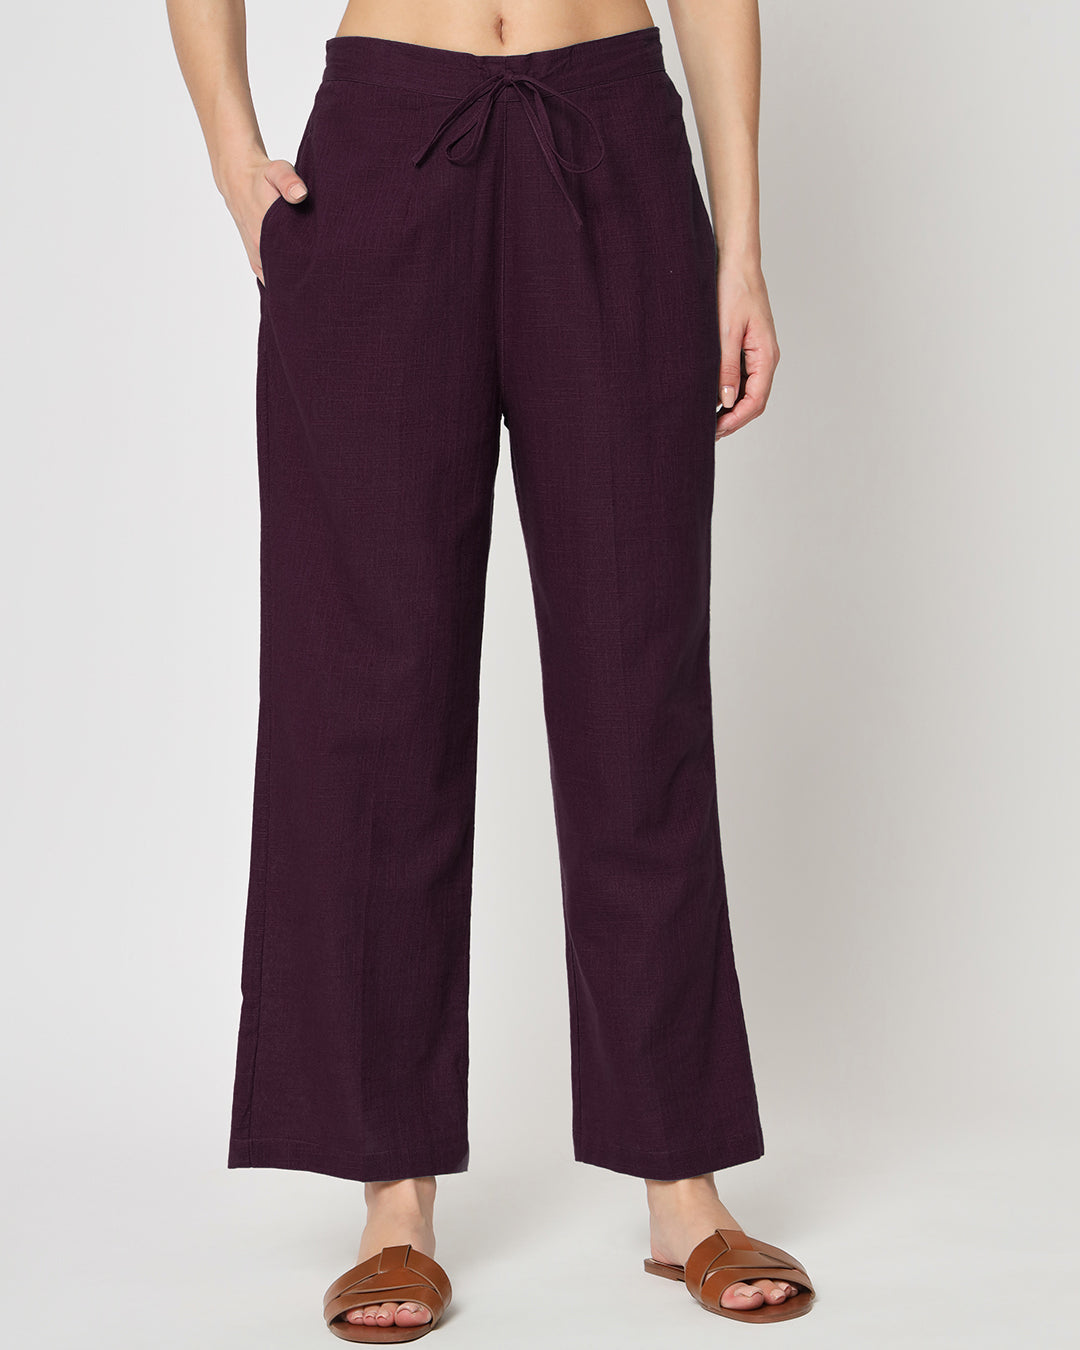 Combo: Wings Of Love & Plum Passion Straight Pants- Set of 2